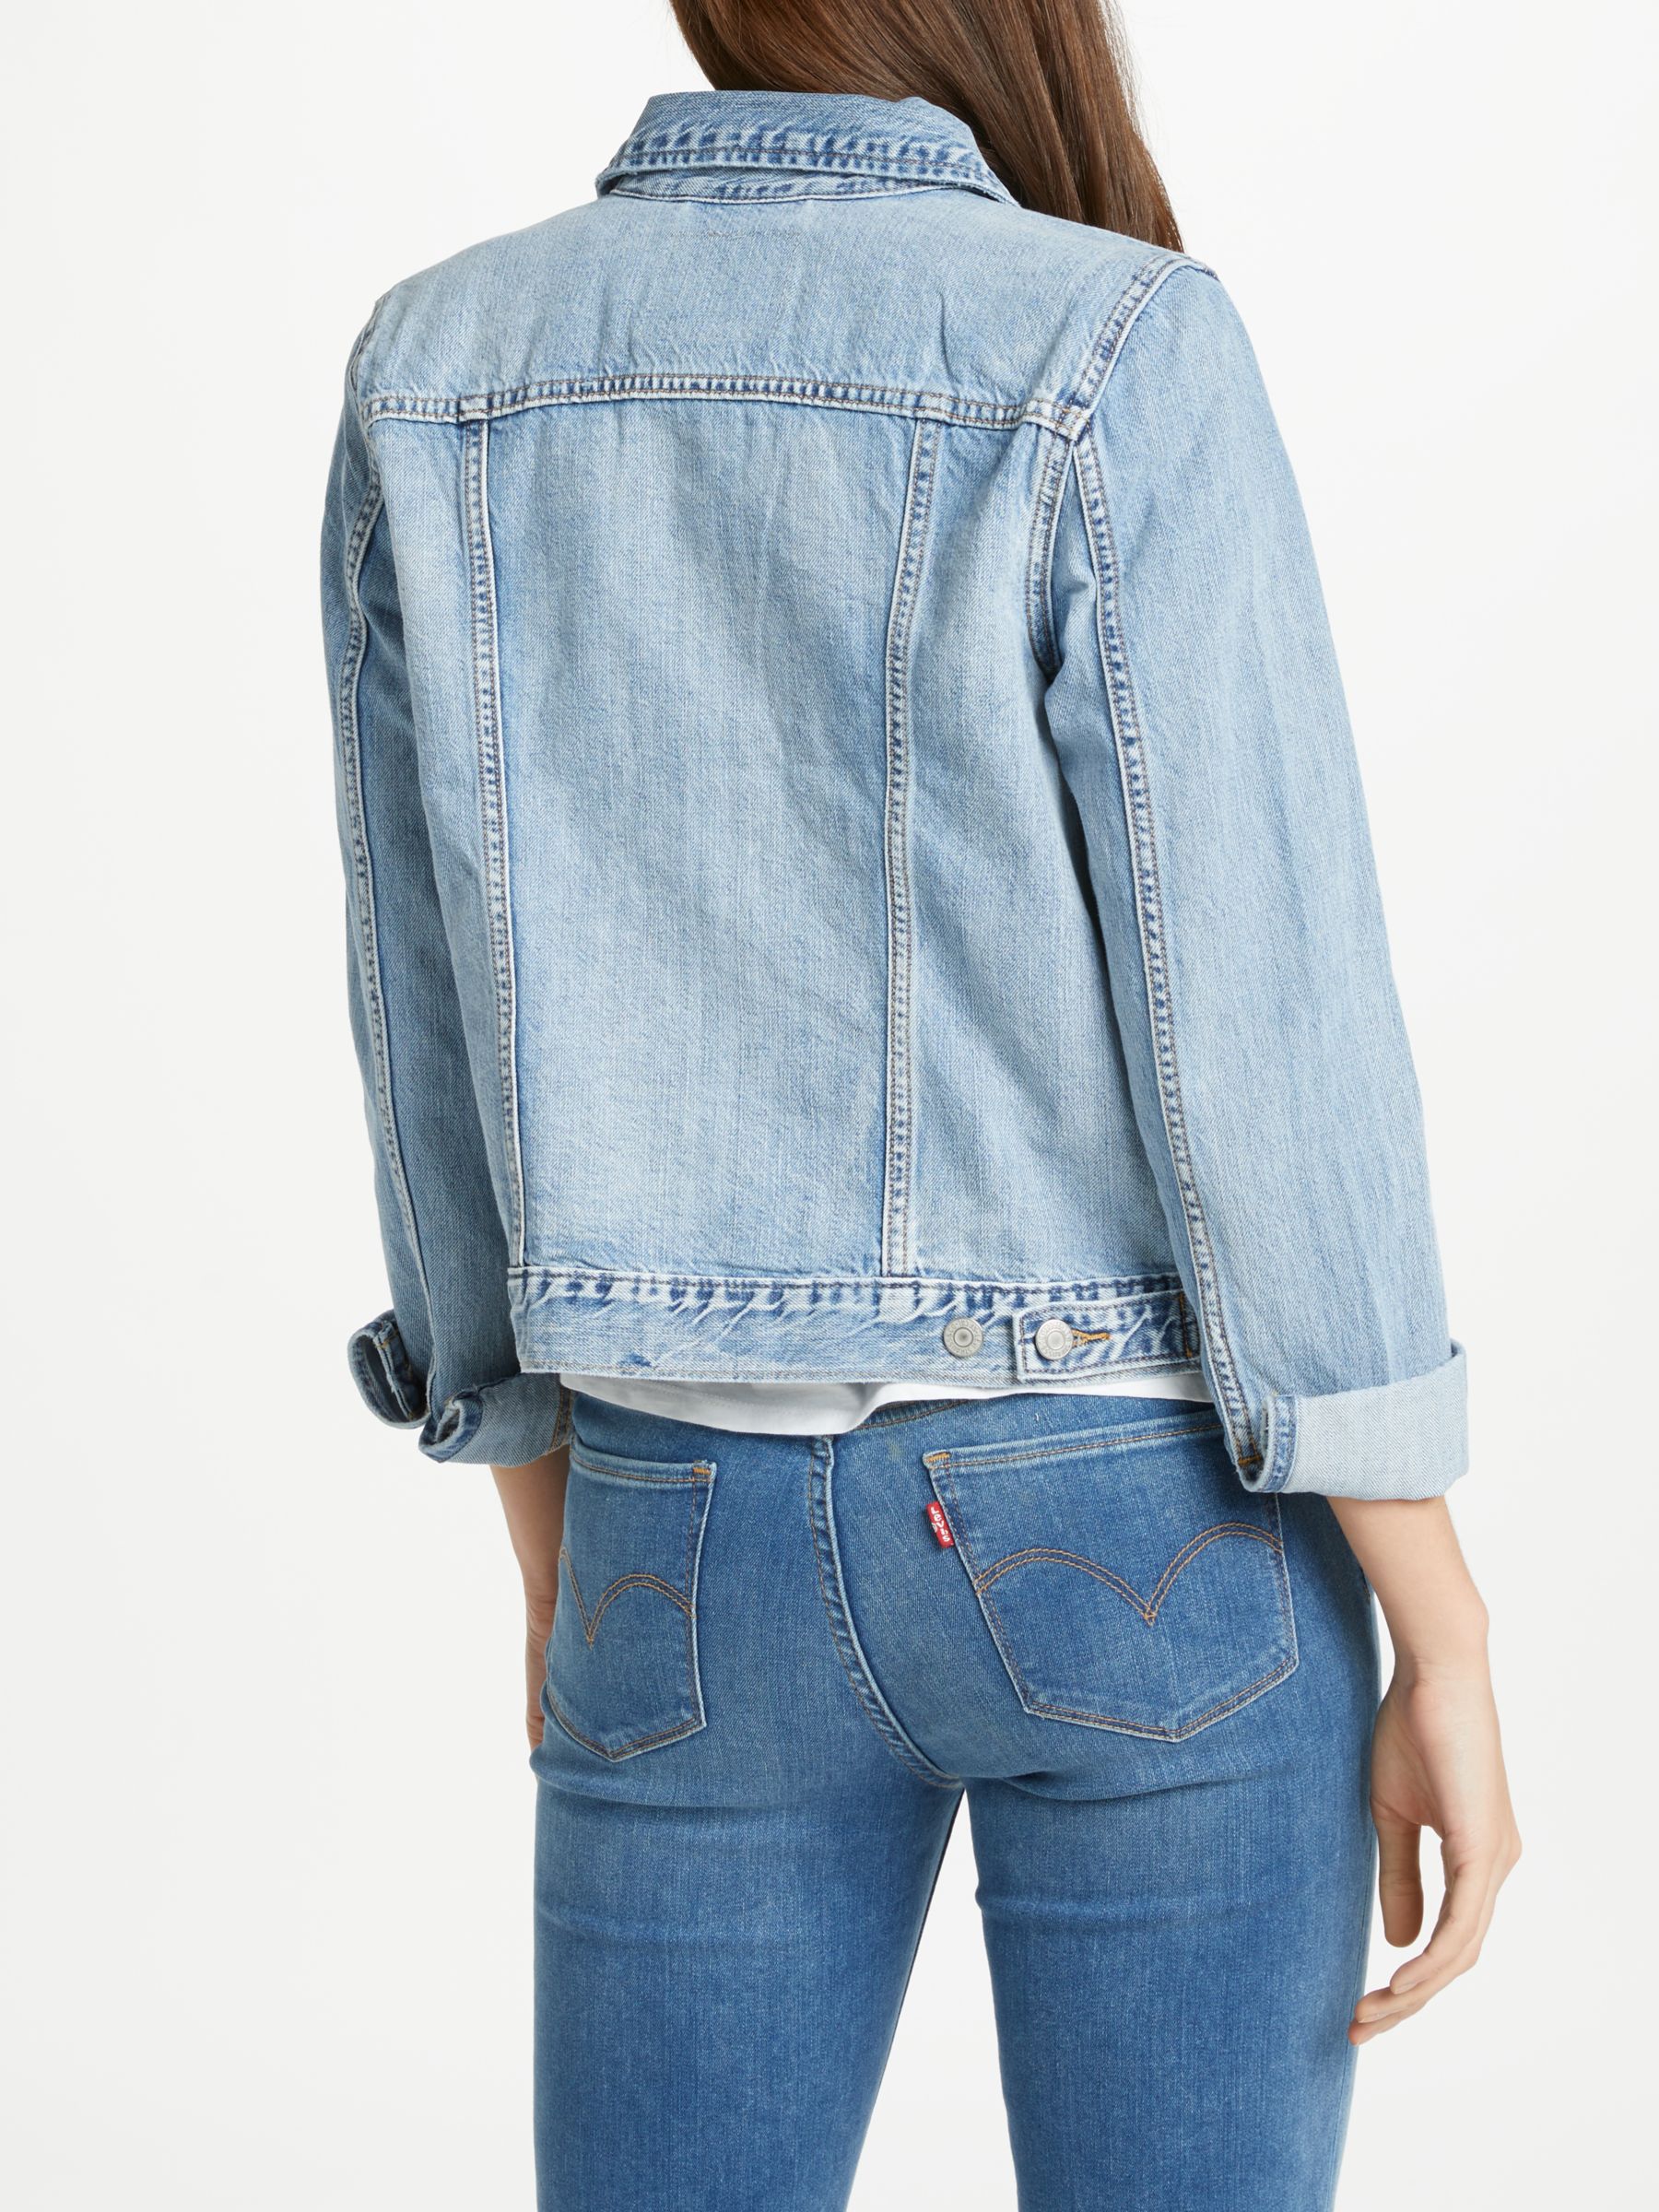 Levi's Original Trucker Jacket, All Yours at John Lewis & Partners